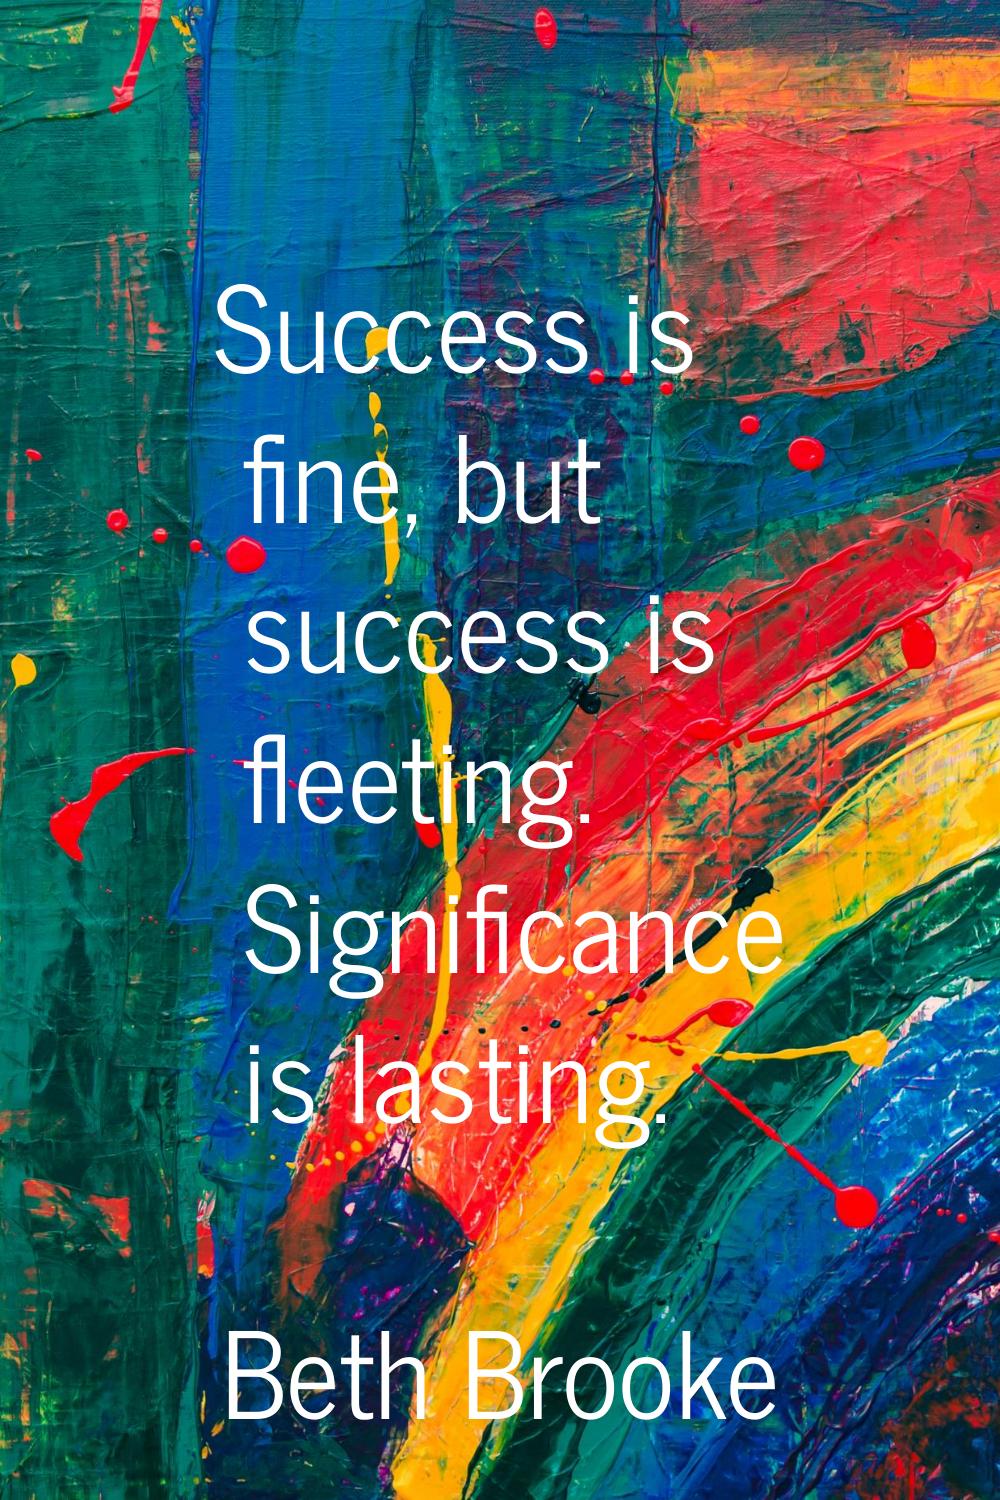 Success is fine, but success is fleeting. Significance is lasting.